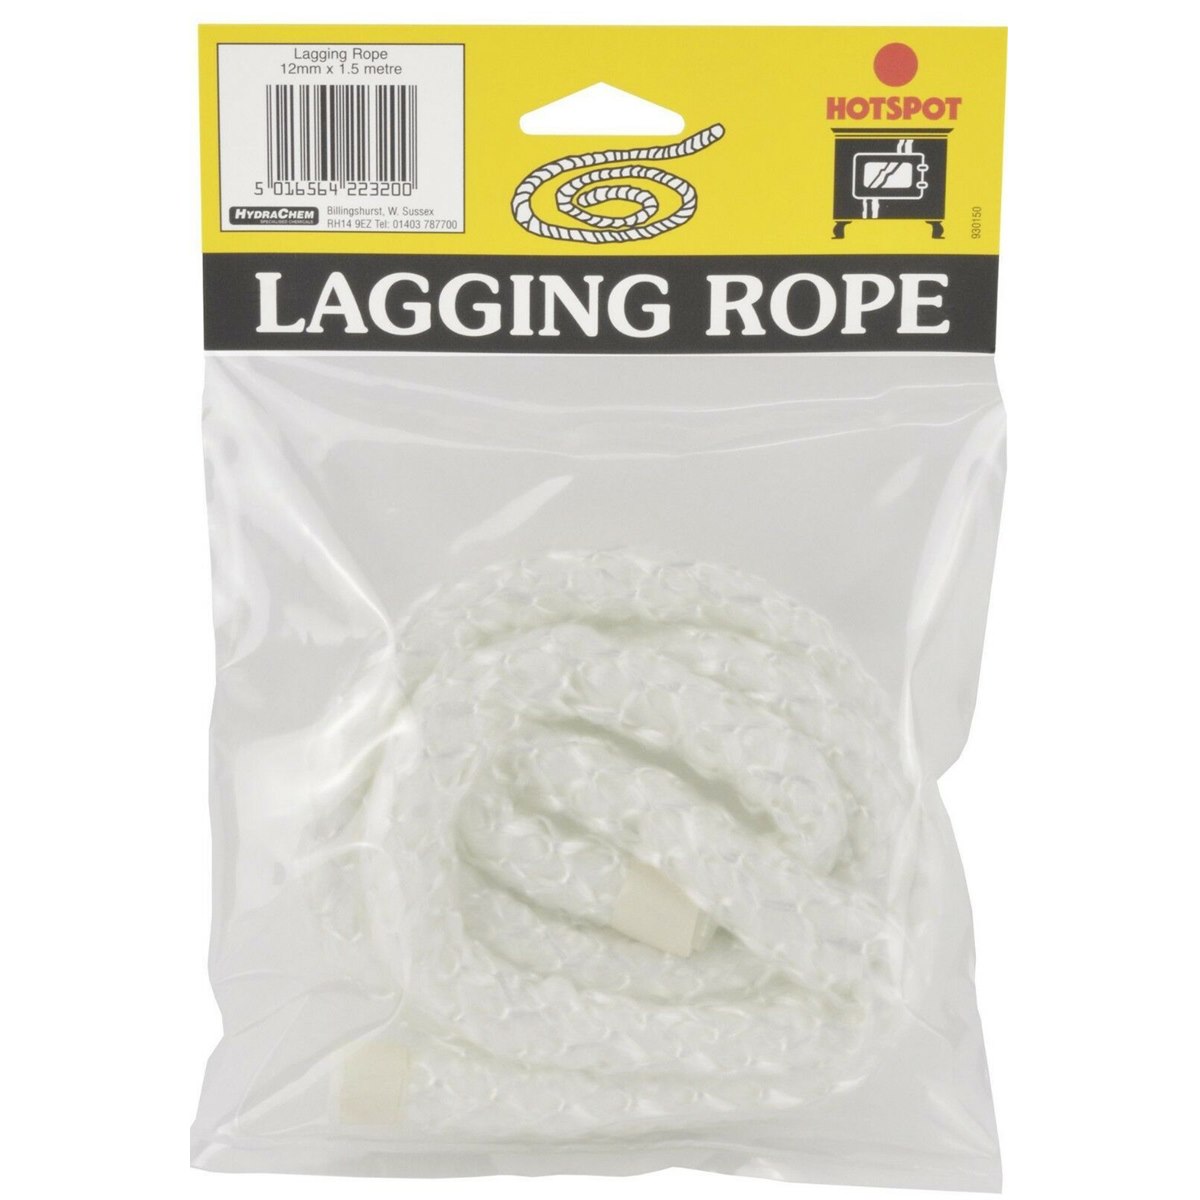 Where to Buy Lagging Rope